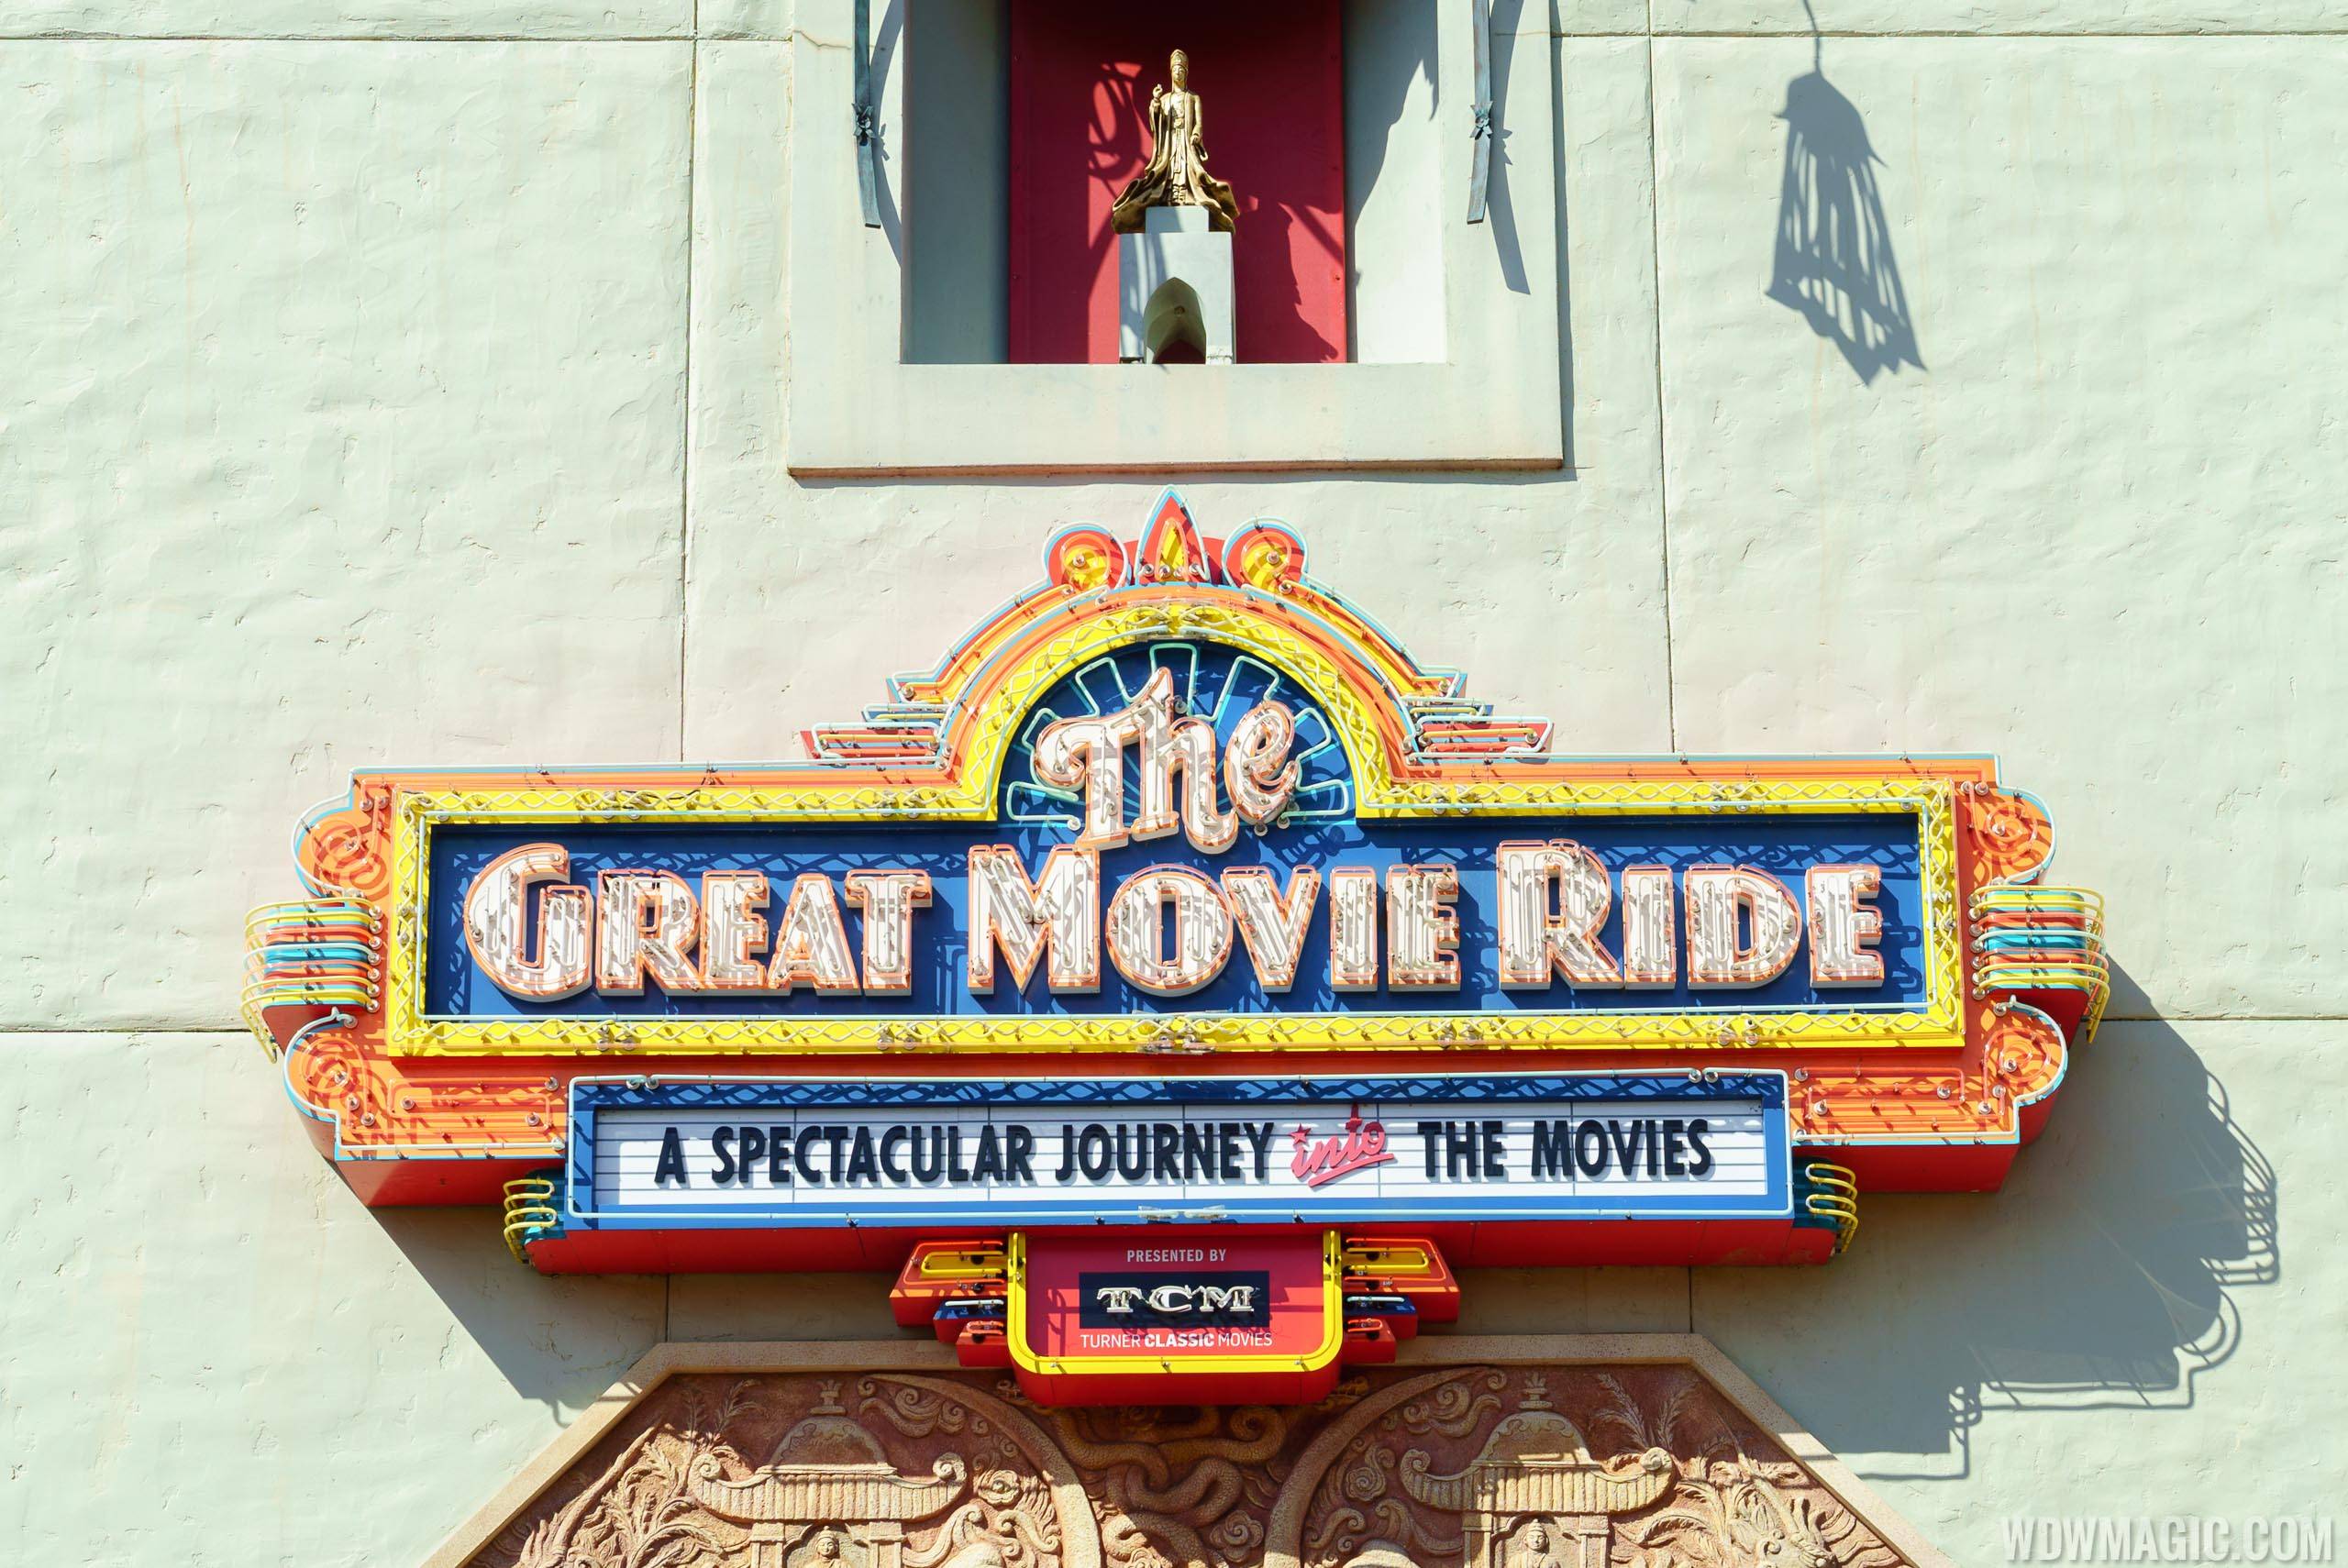 The Great Movie Ride - Signage